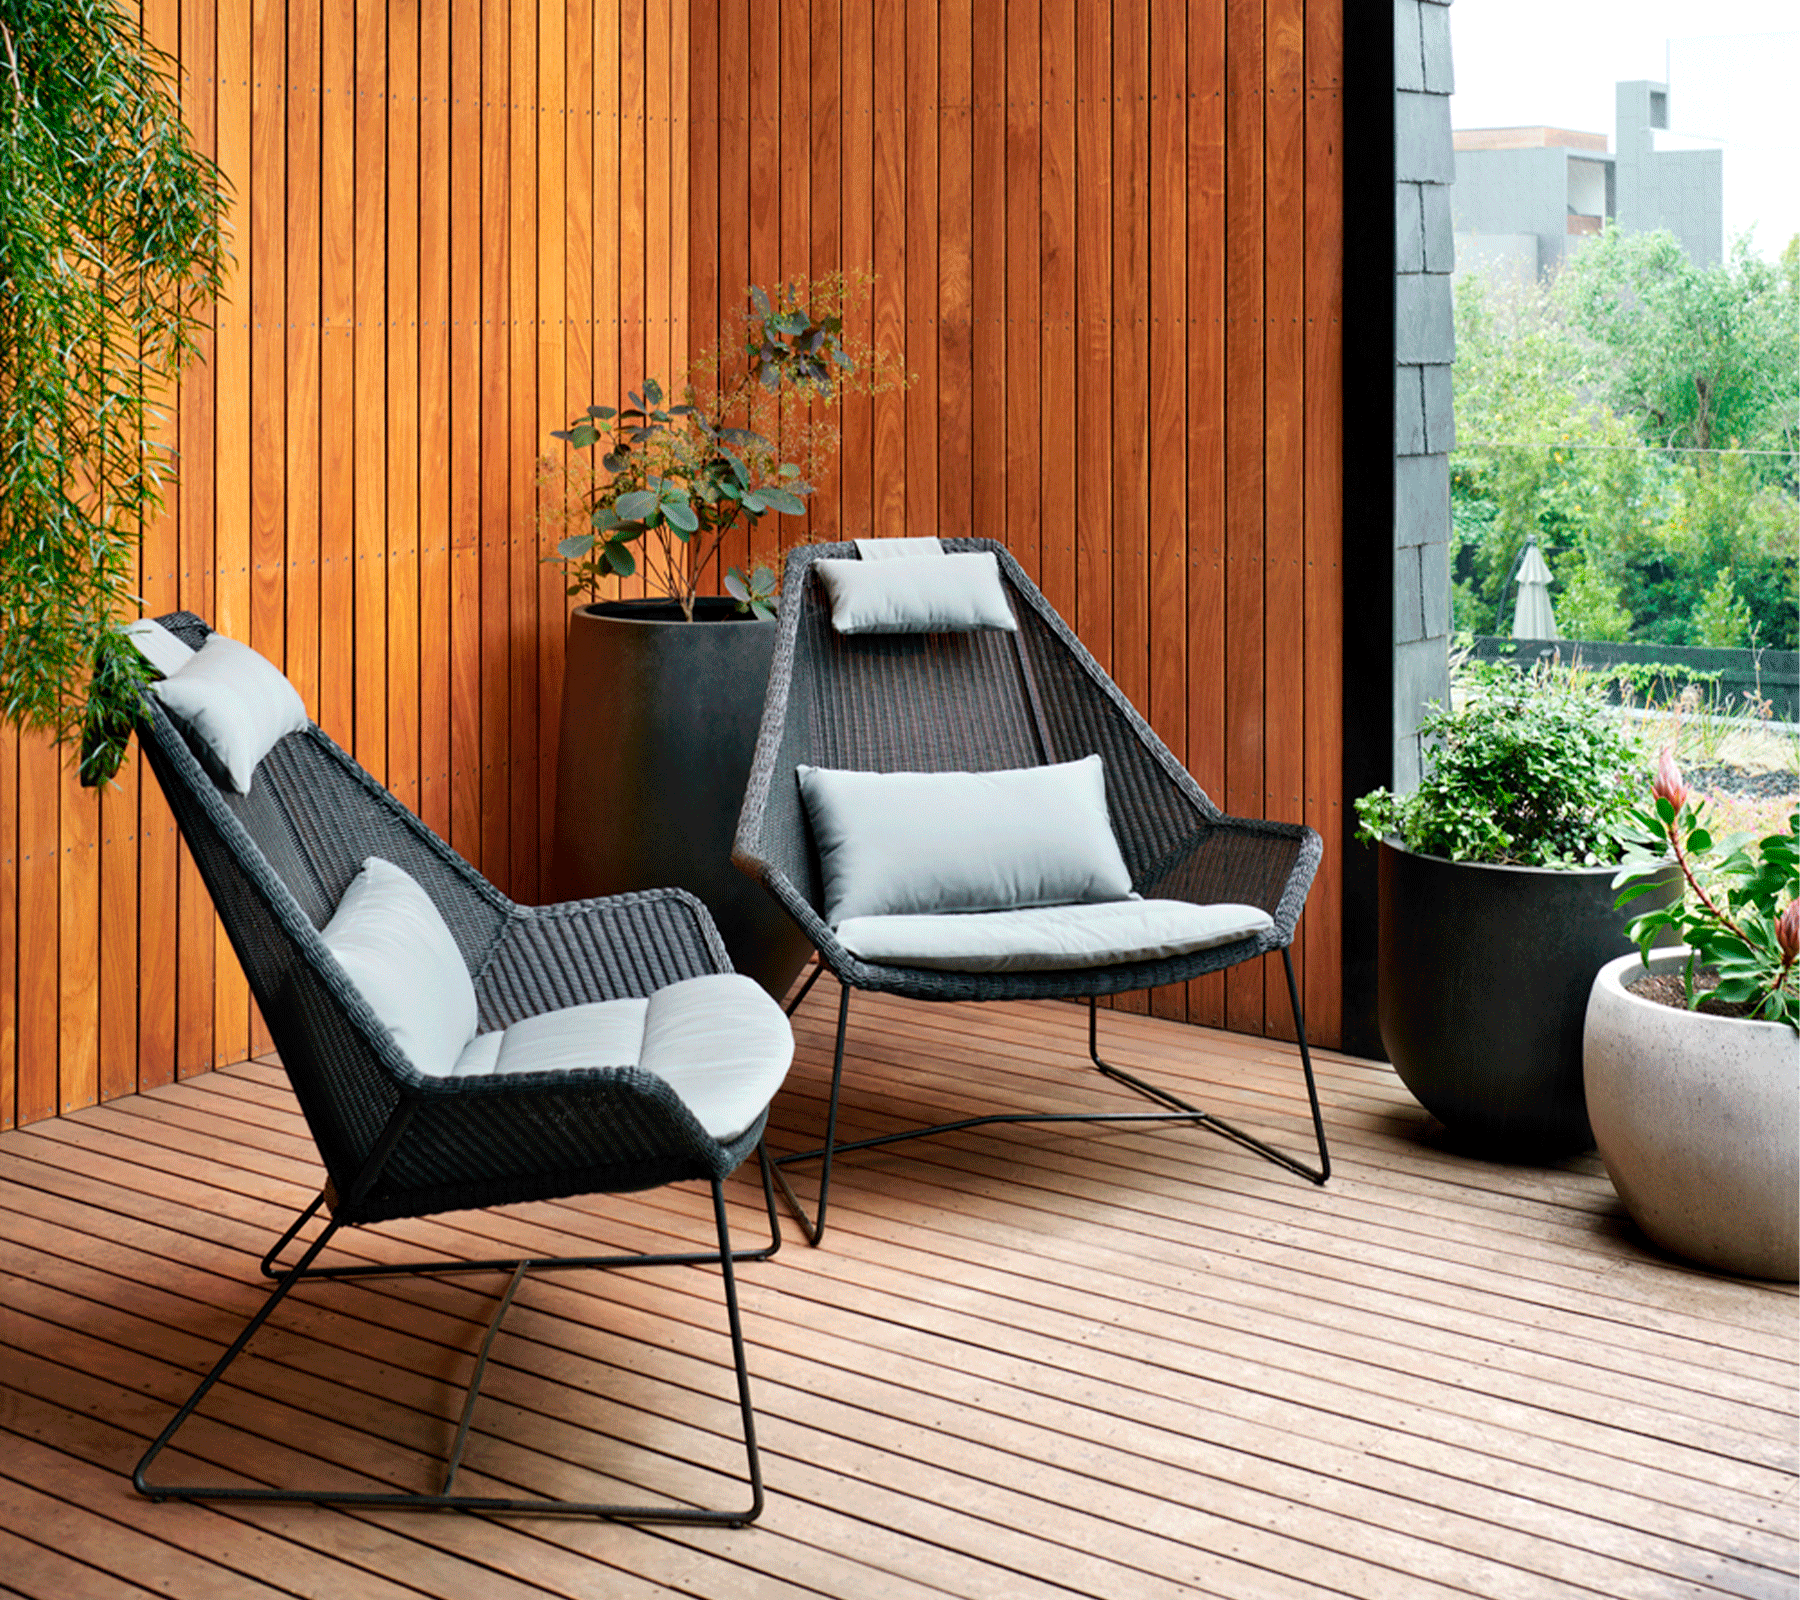 Boxhill's Breeze Highback Outdoor Chair Black lifestyle image on wooden platform beside plants